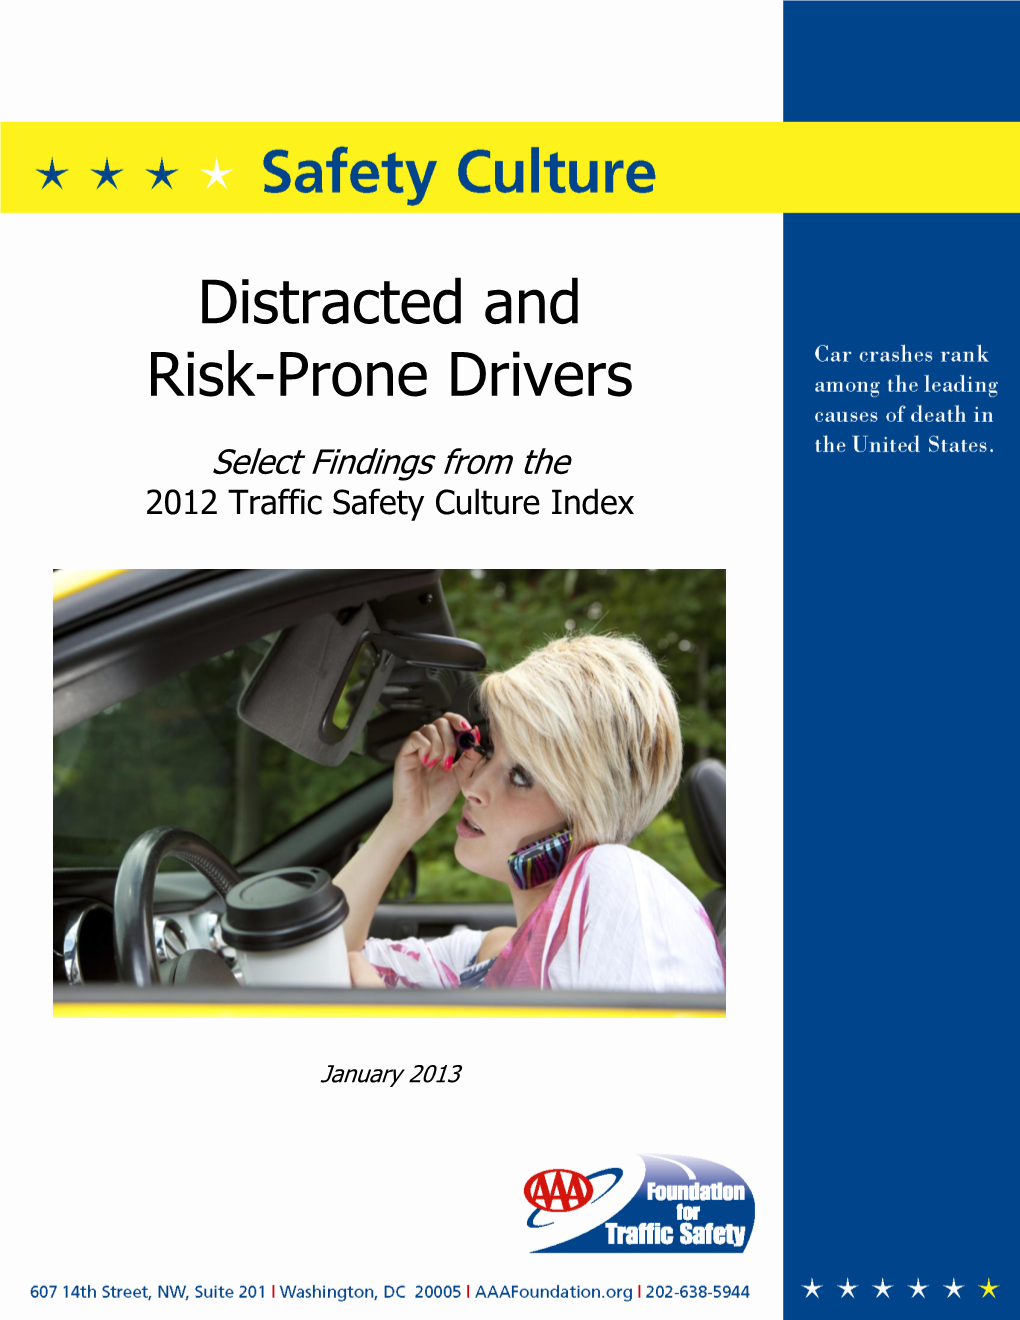 Distracted and Risk-Prone Drivers